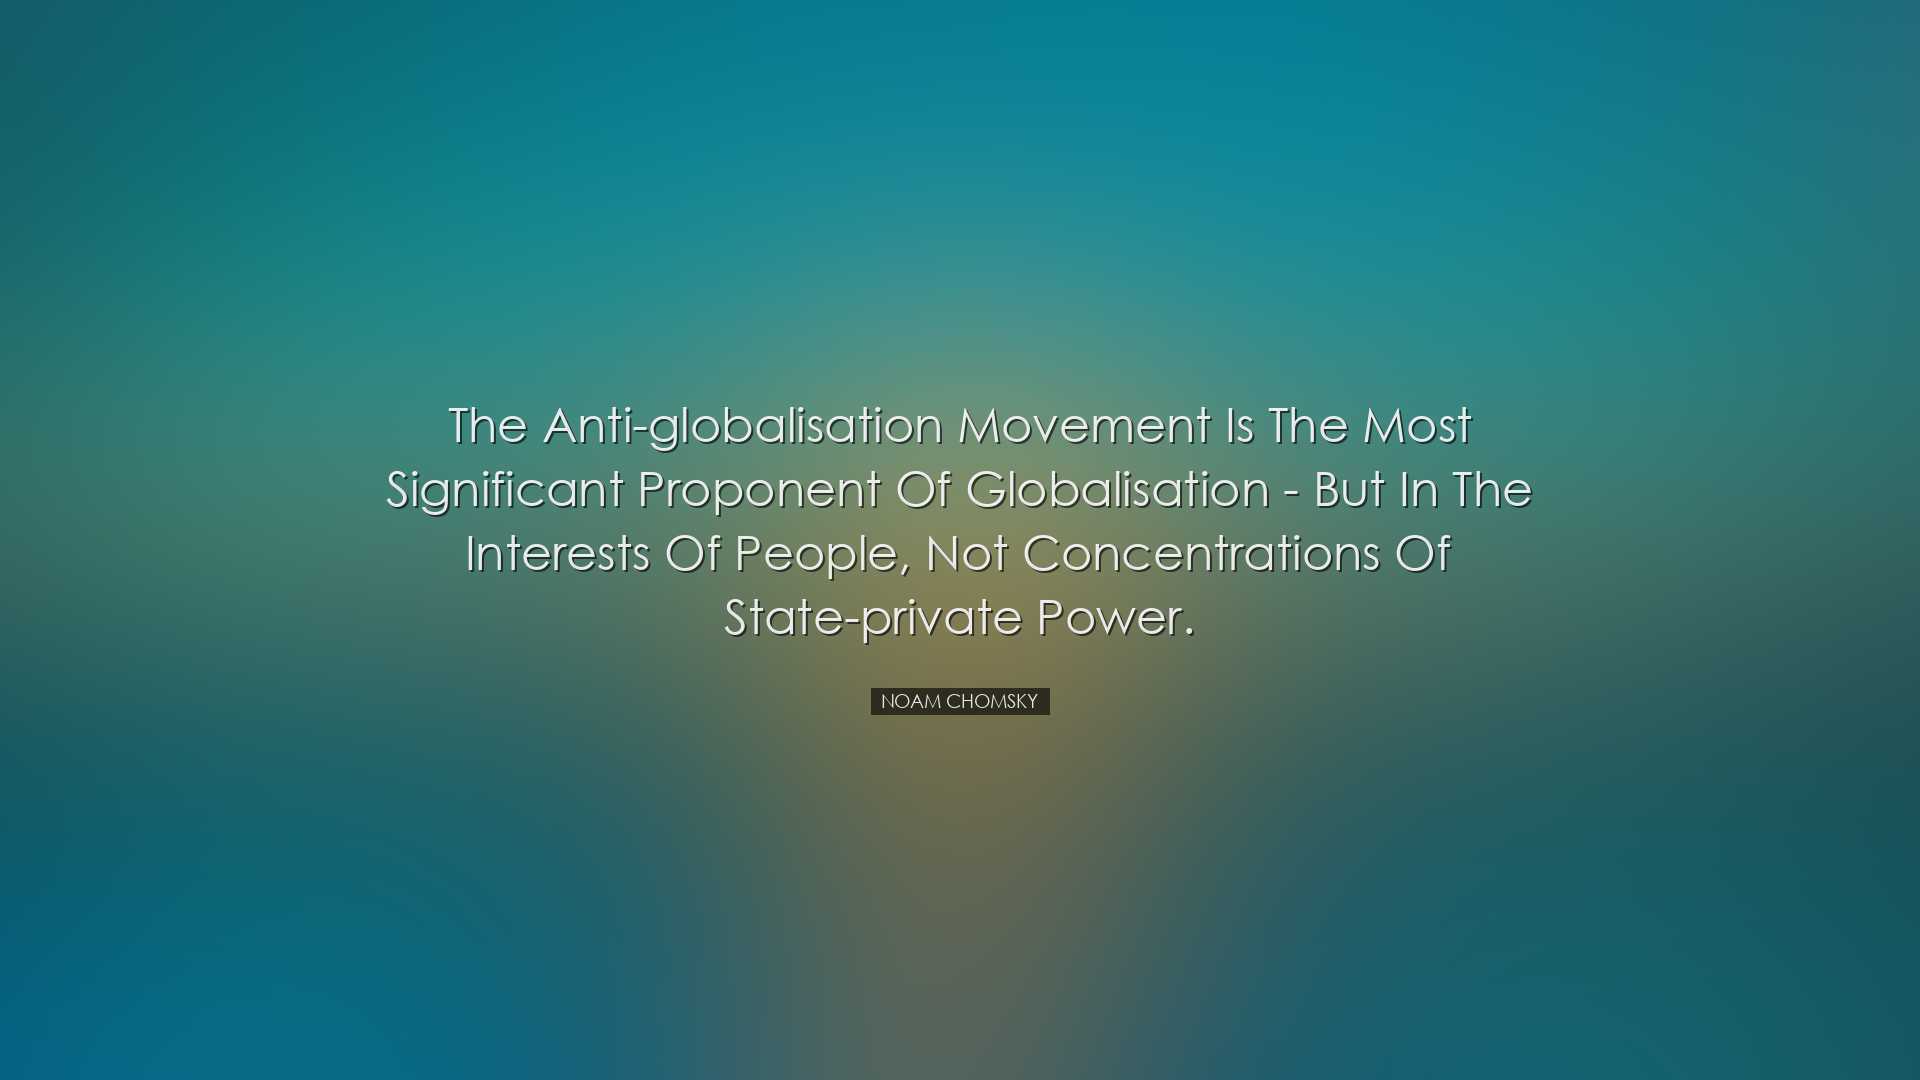 The anti-globalisation movement is the most significant proponent